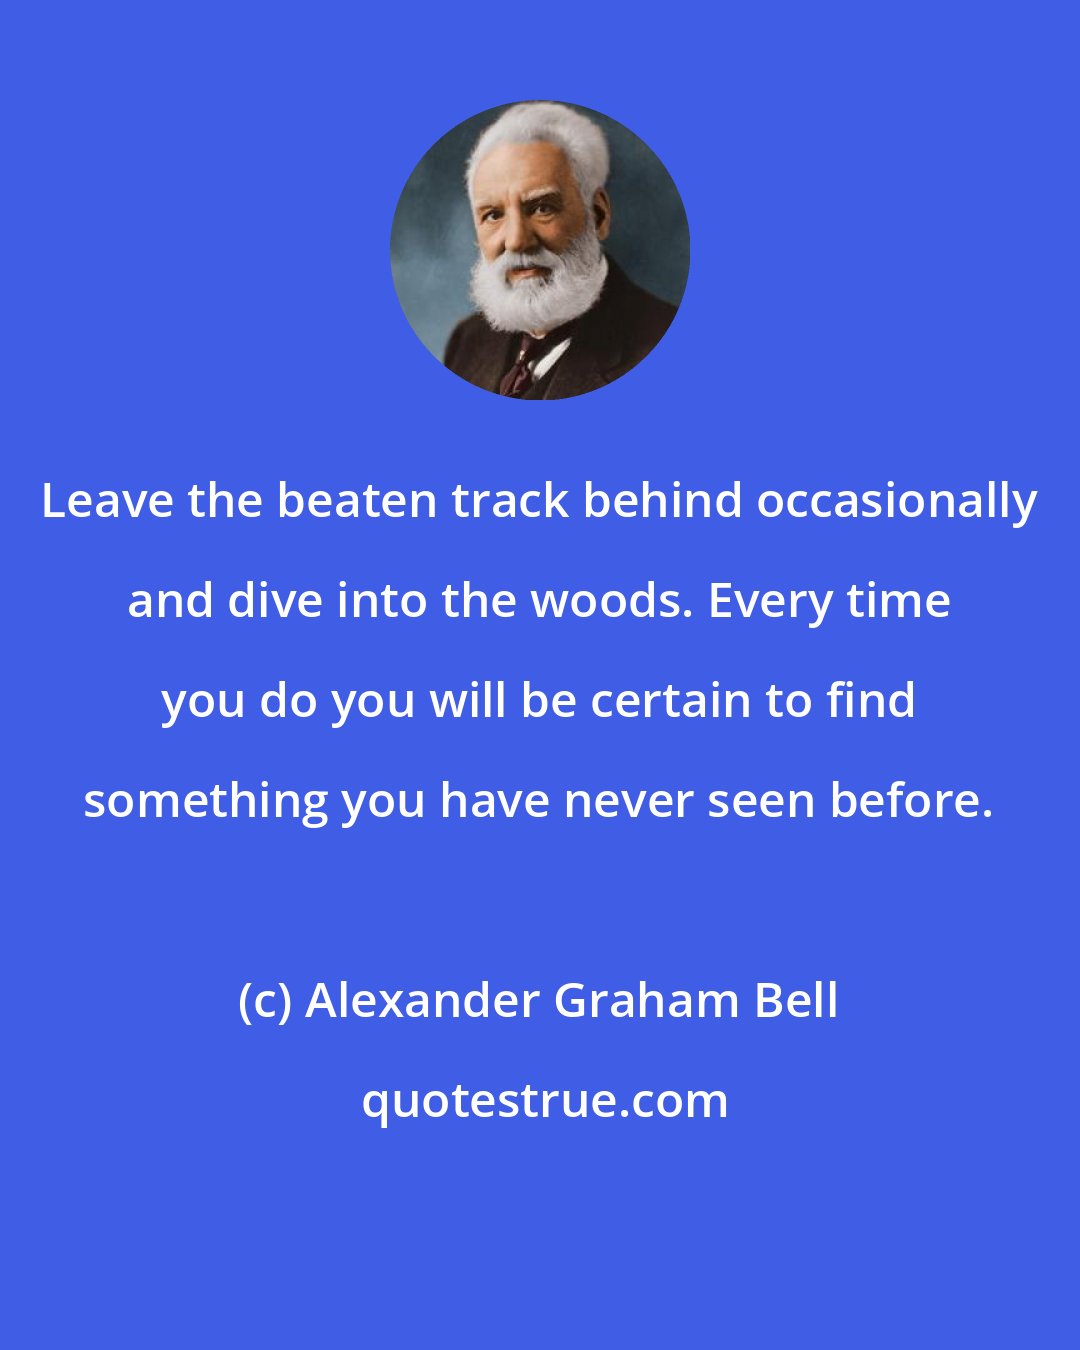 Alexander Graham Bell: Leave the beaten track behind occasionally and dive into the woods. Every time you do you will be certain to find something you have never seen before.